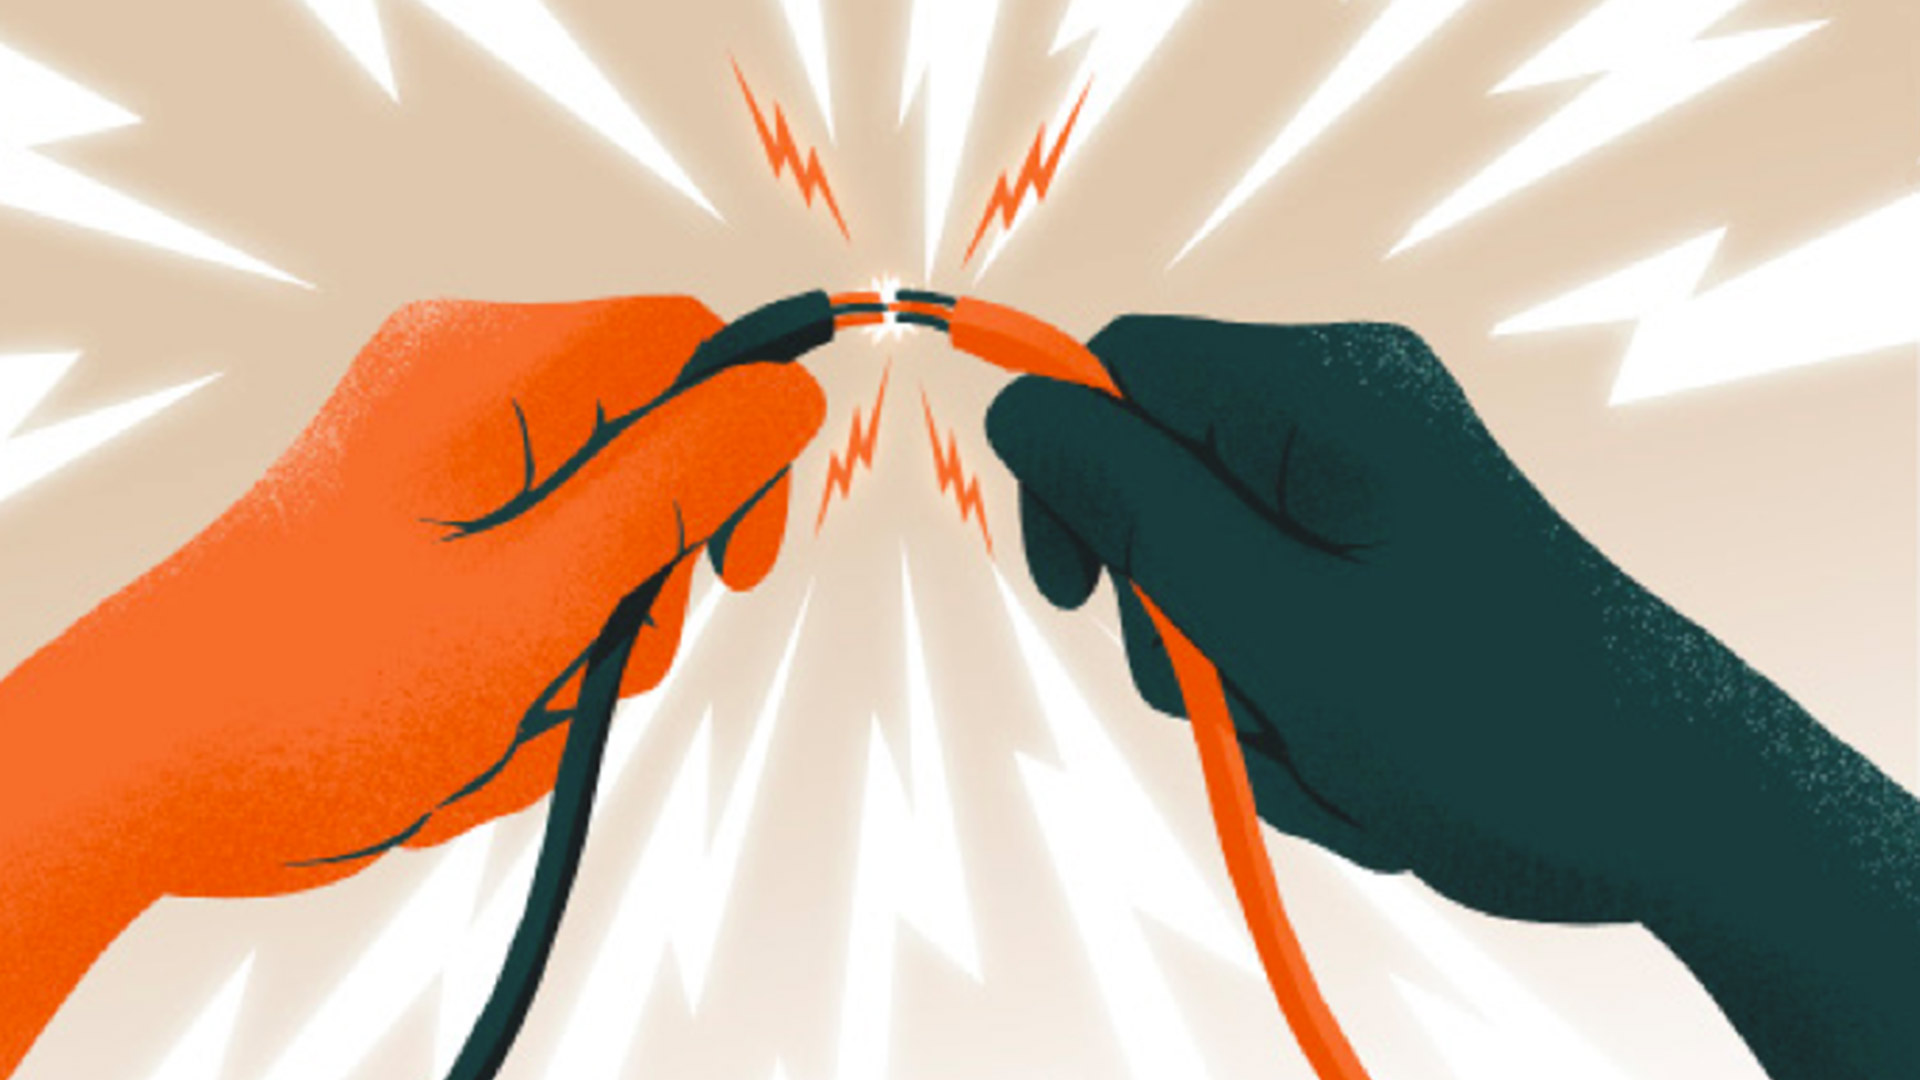 Two hands connecting a wire, illustrated by Pietari Posti .